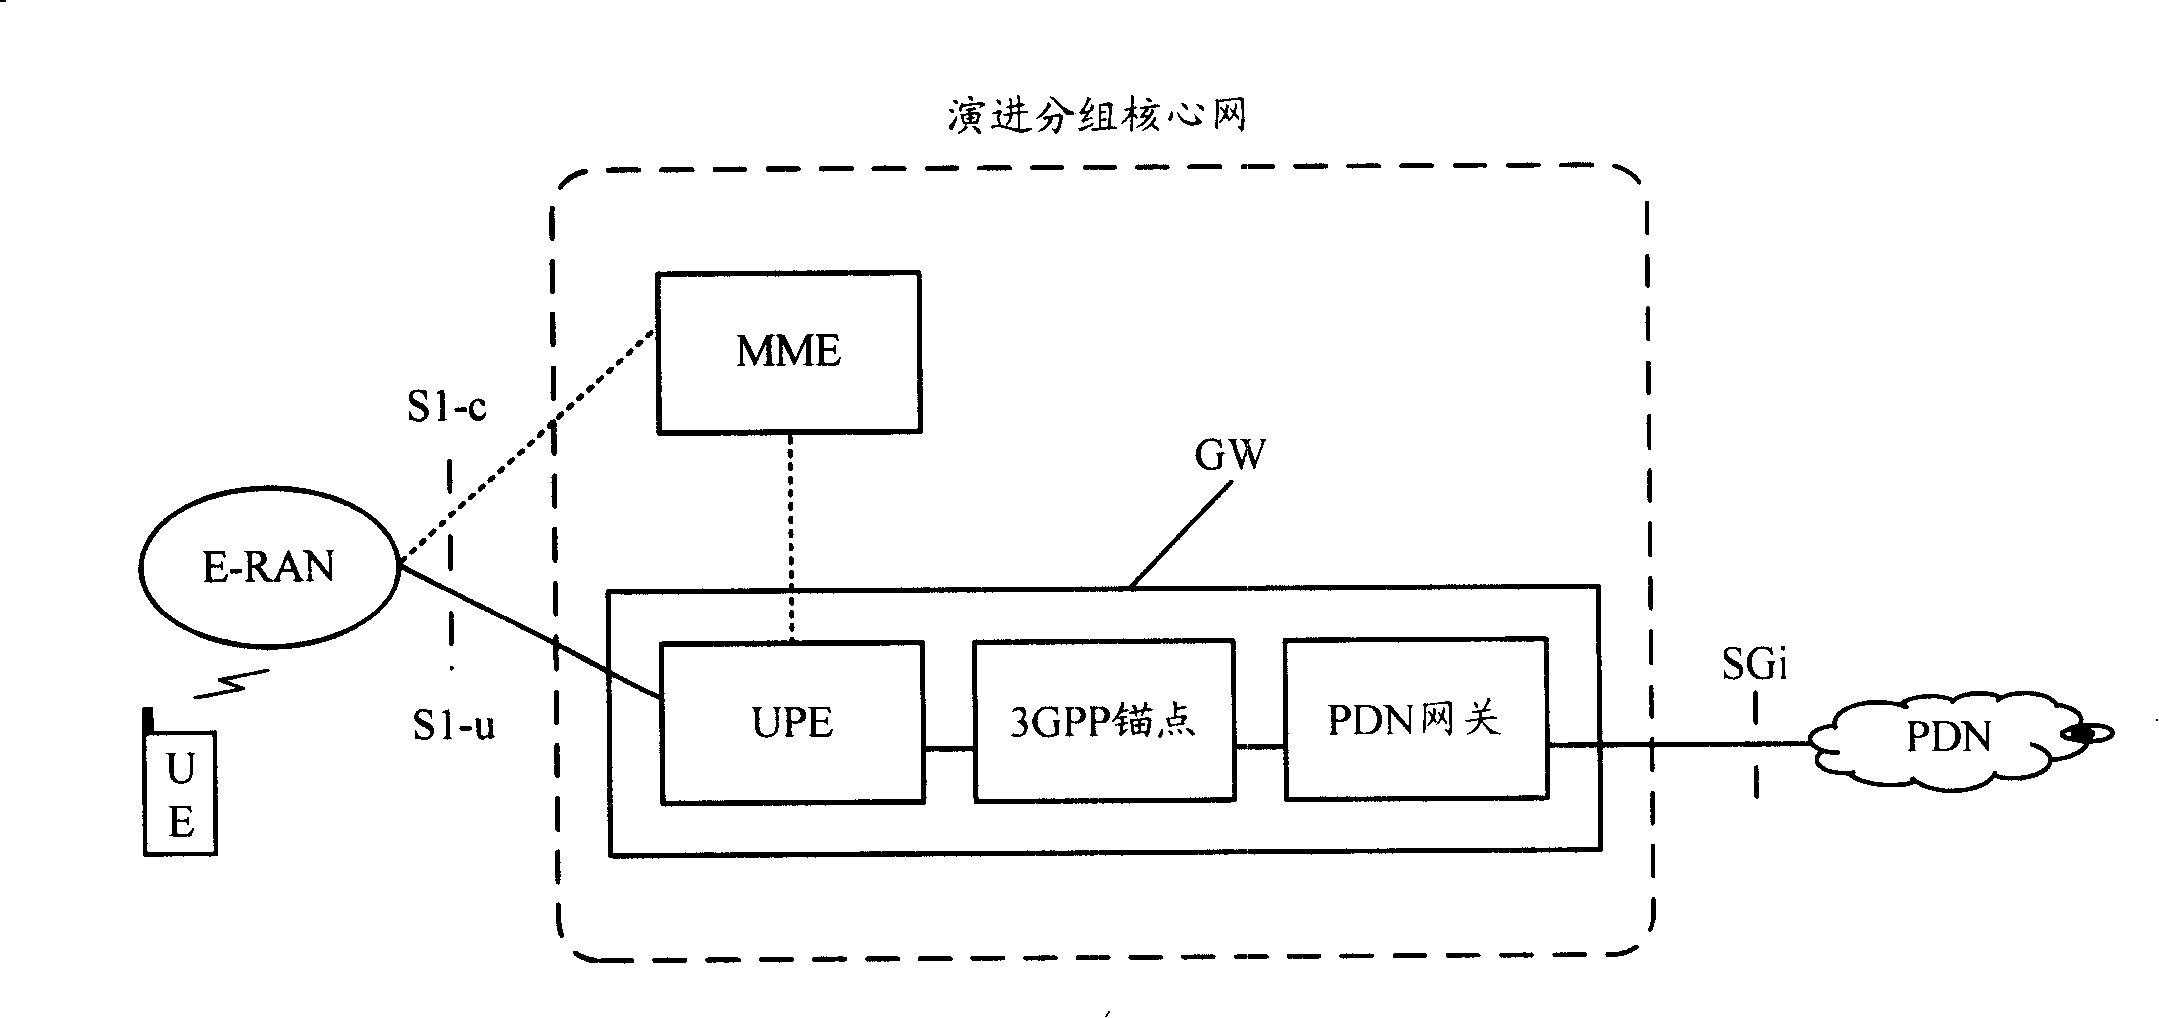 Customer premise equipment switching method and system in radio network